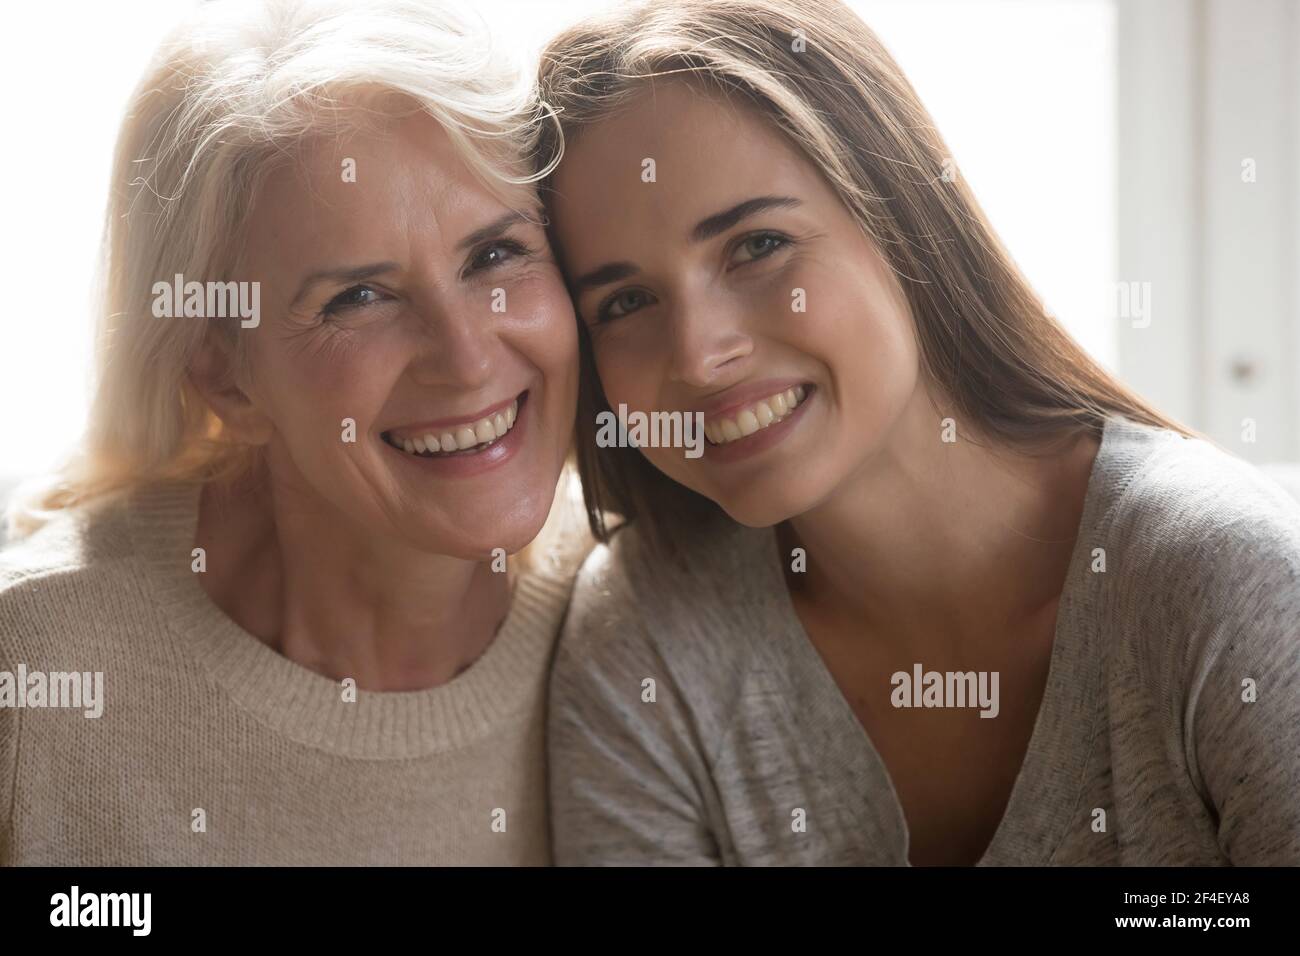 Headshot portrait of happy mature mom and adult daughter Stock Photo